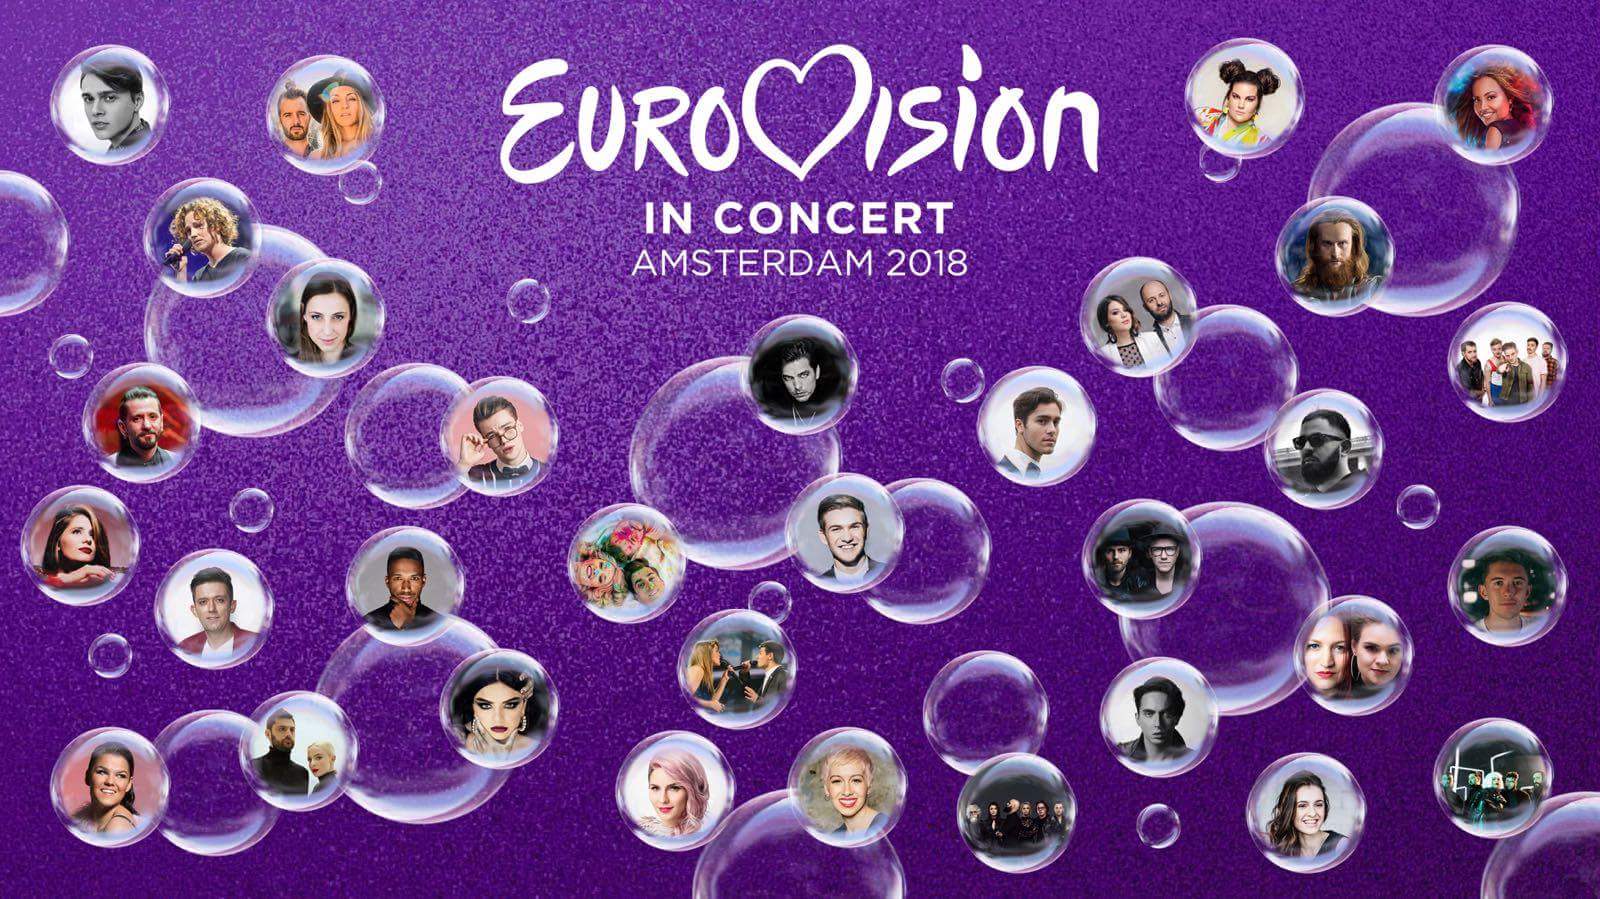 Tonight: Eurovision in Concert 2018 in Amsterdam